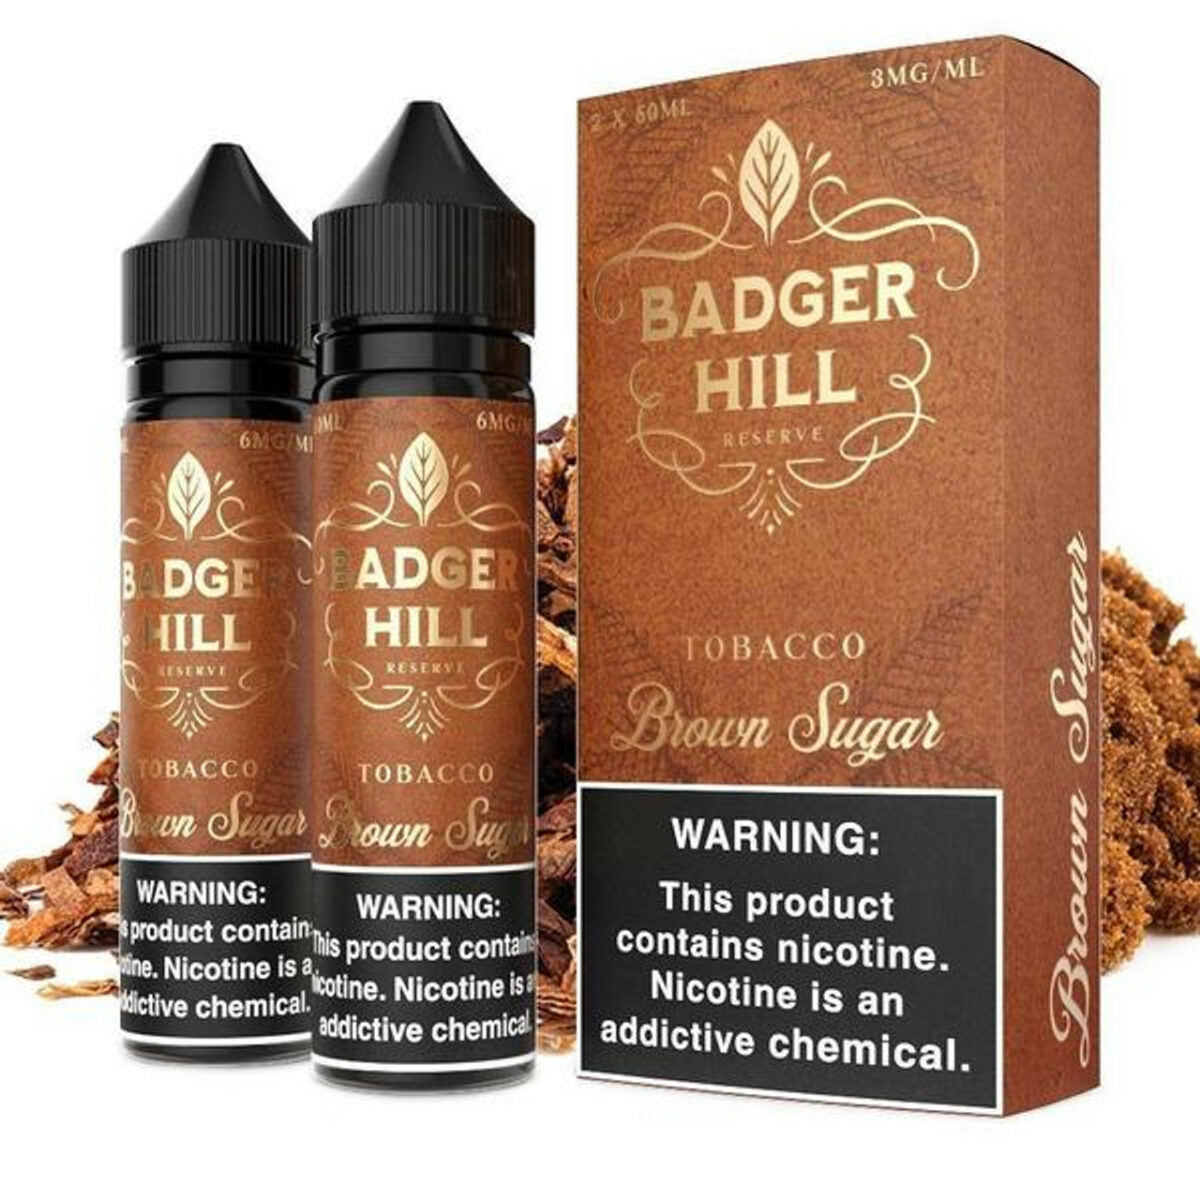 Brown Sugar by Badger Hill Reserve Series 2x60mL with Packaging